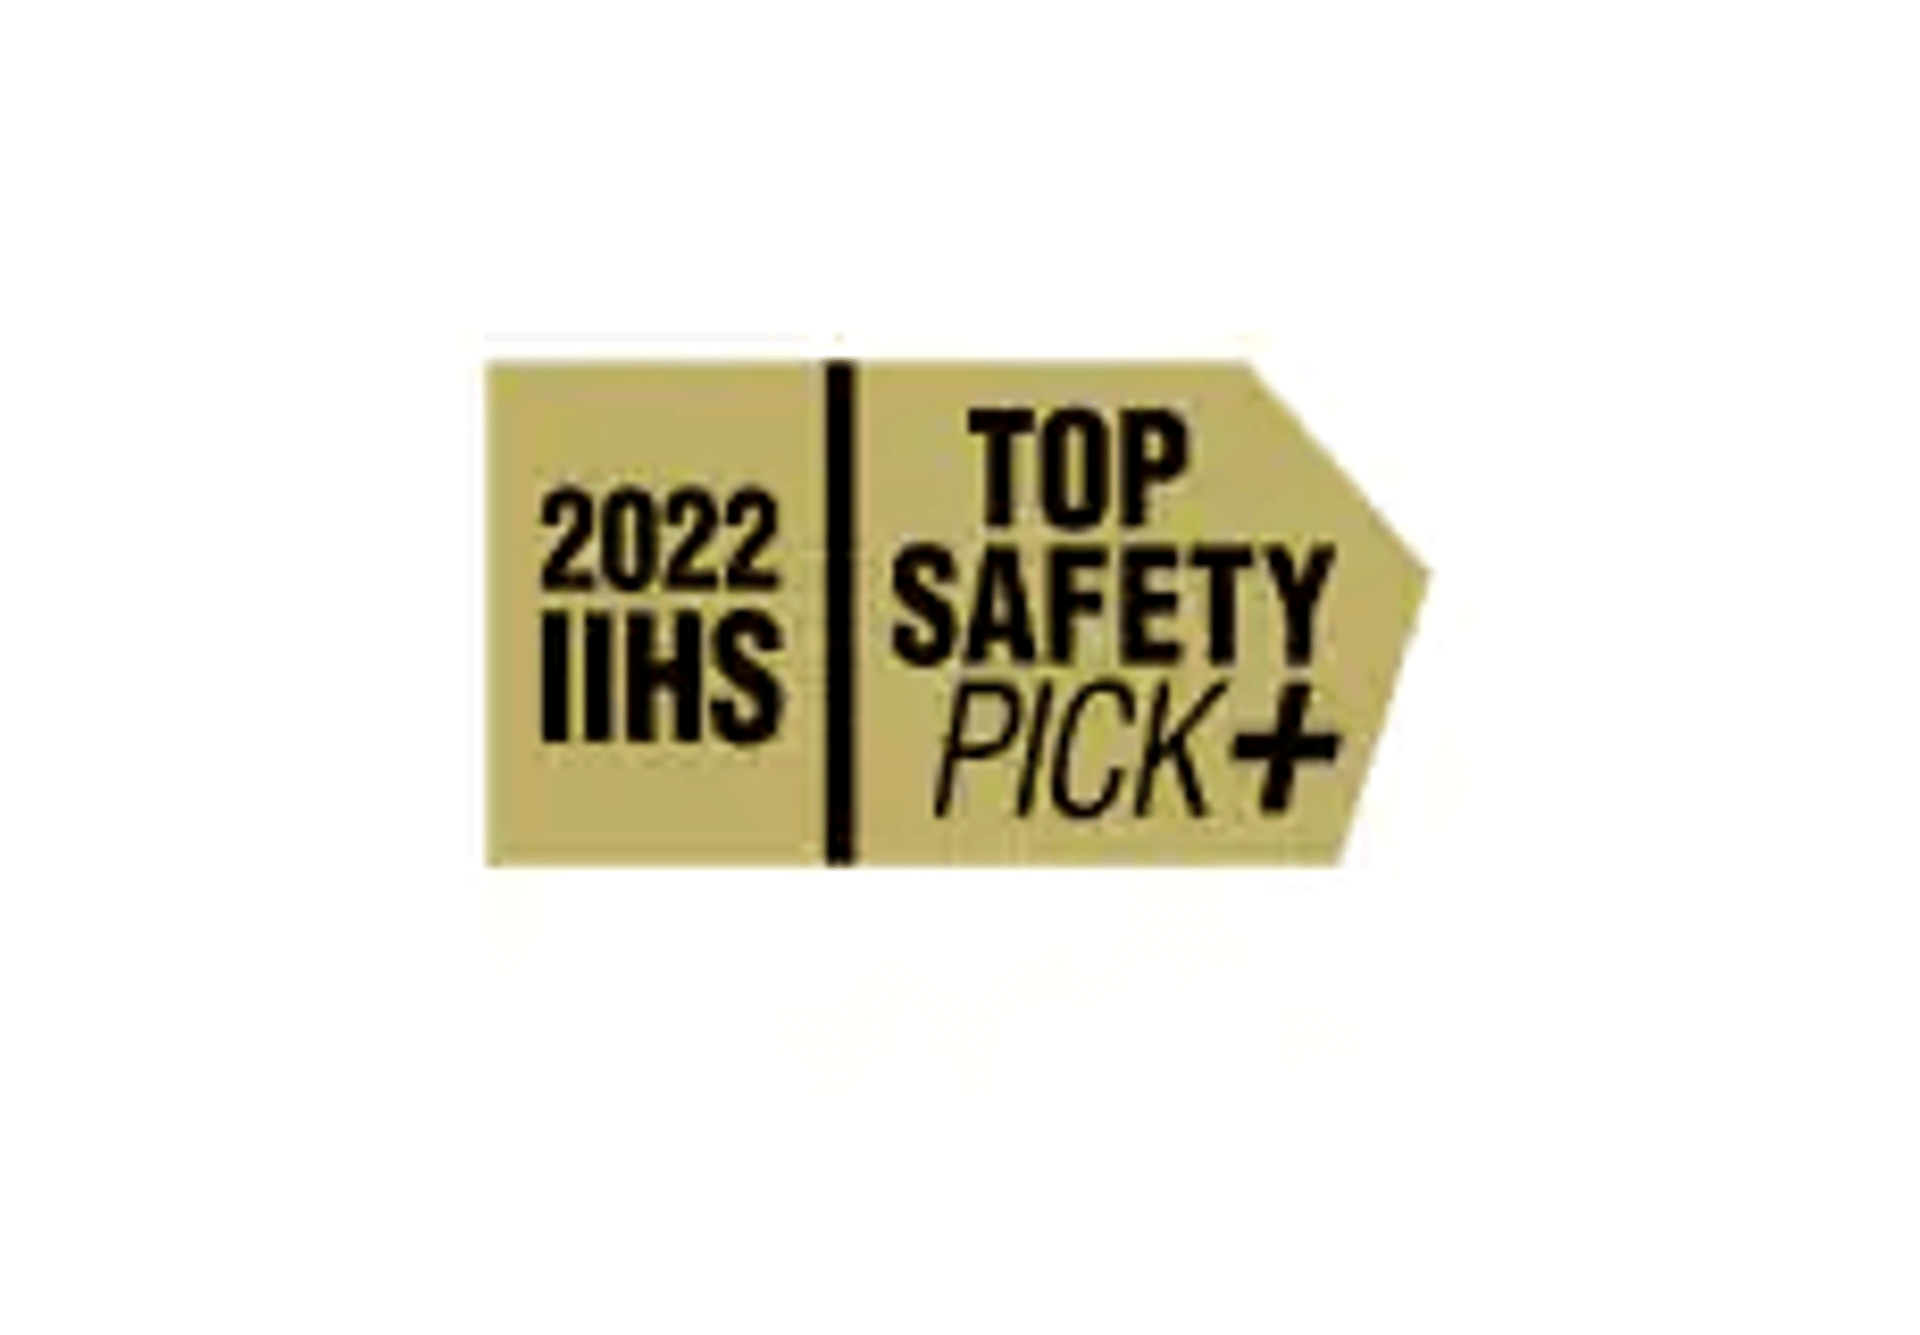 IIHS TOP SAFETY PICK+